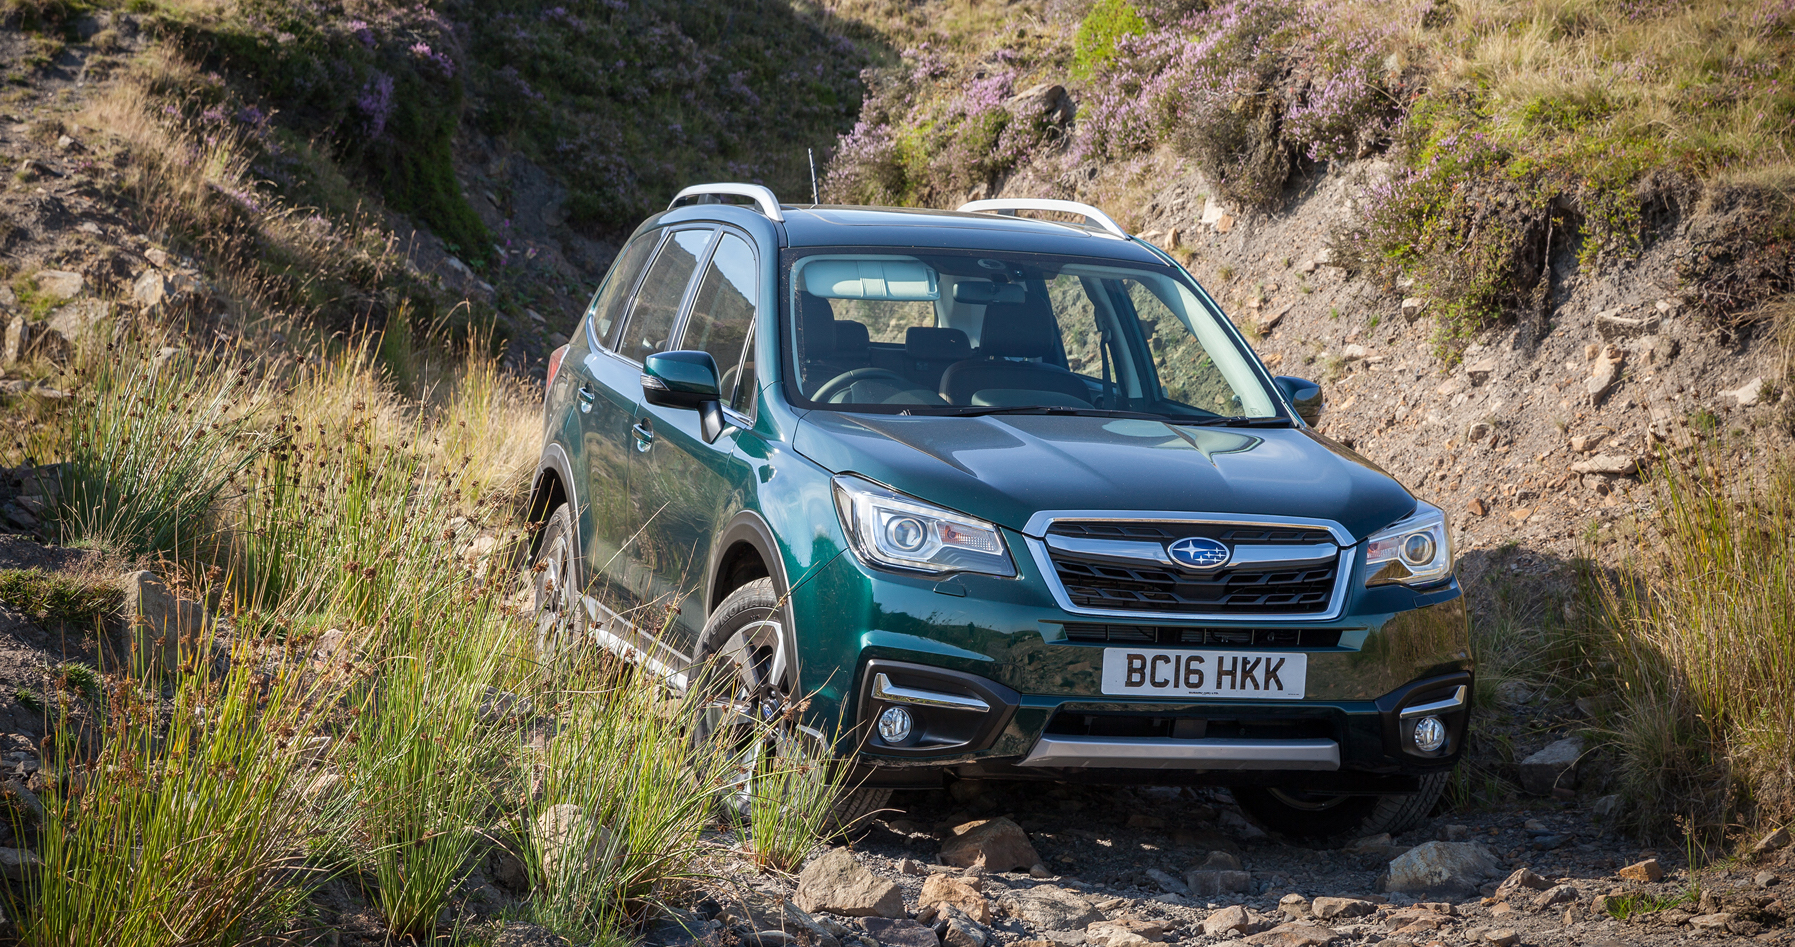 Subaru Forester is the professional’s 4×4 innovator